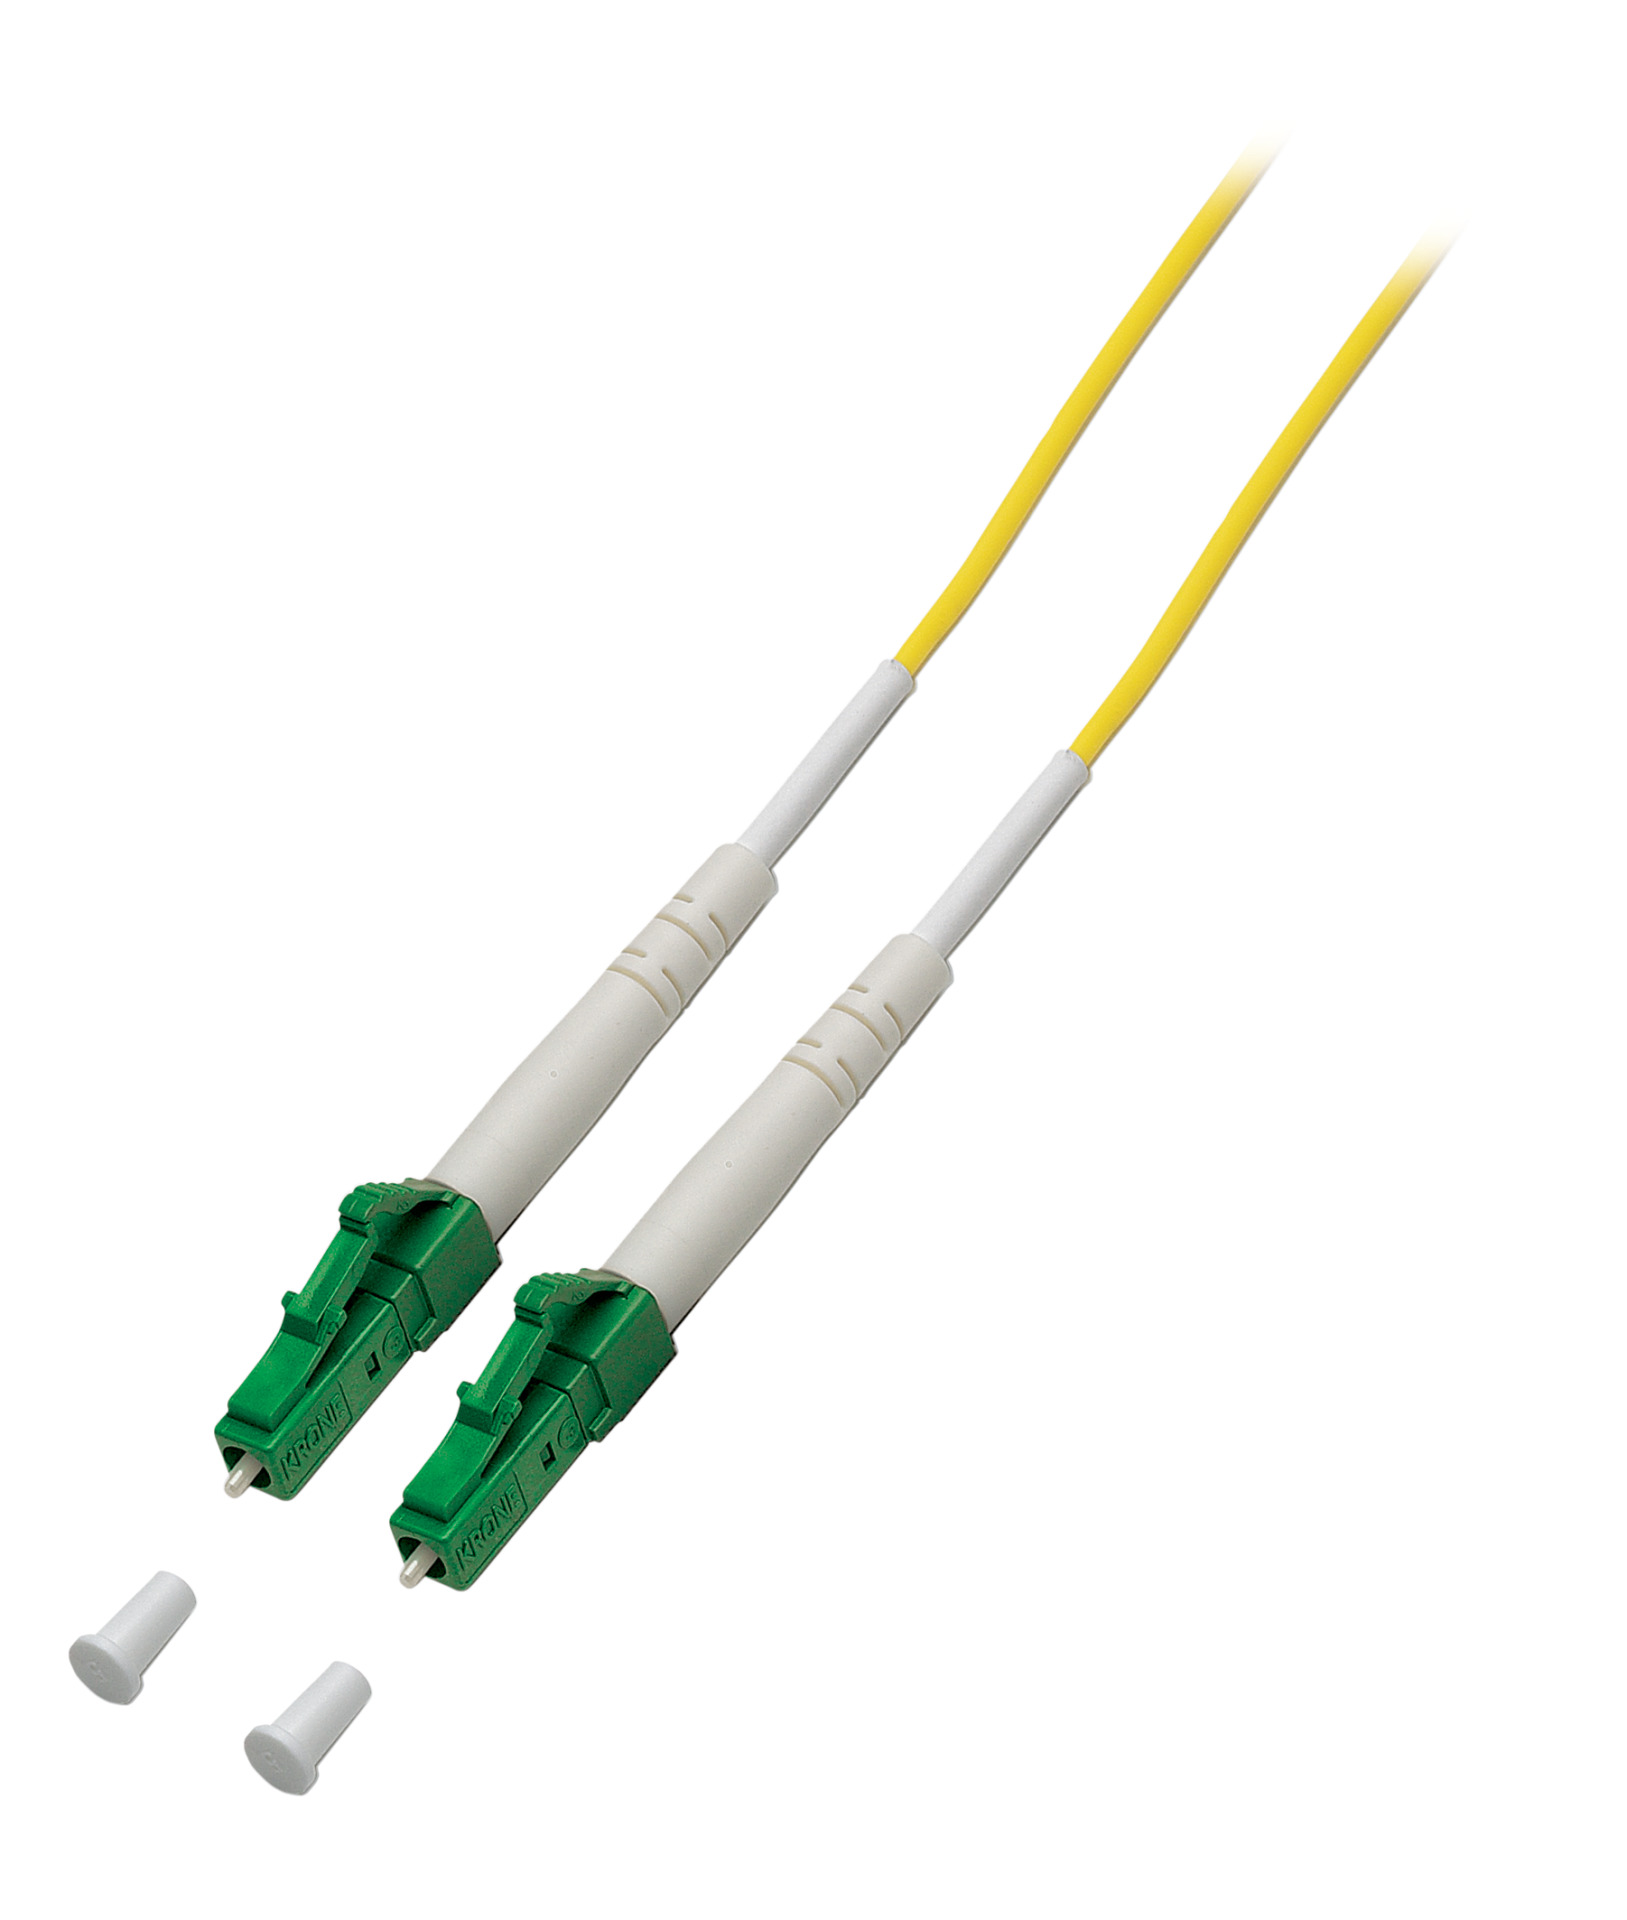 Simplex FO Patch Cable LC/APC-LC/APC G657.A2 15m 2,0mm yellow 9/125µm